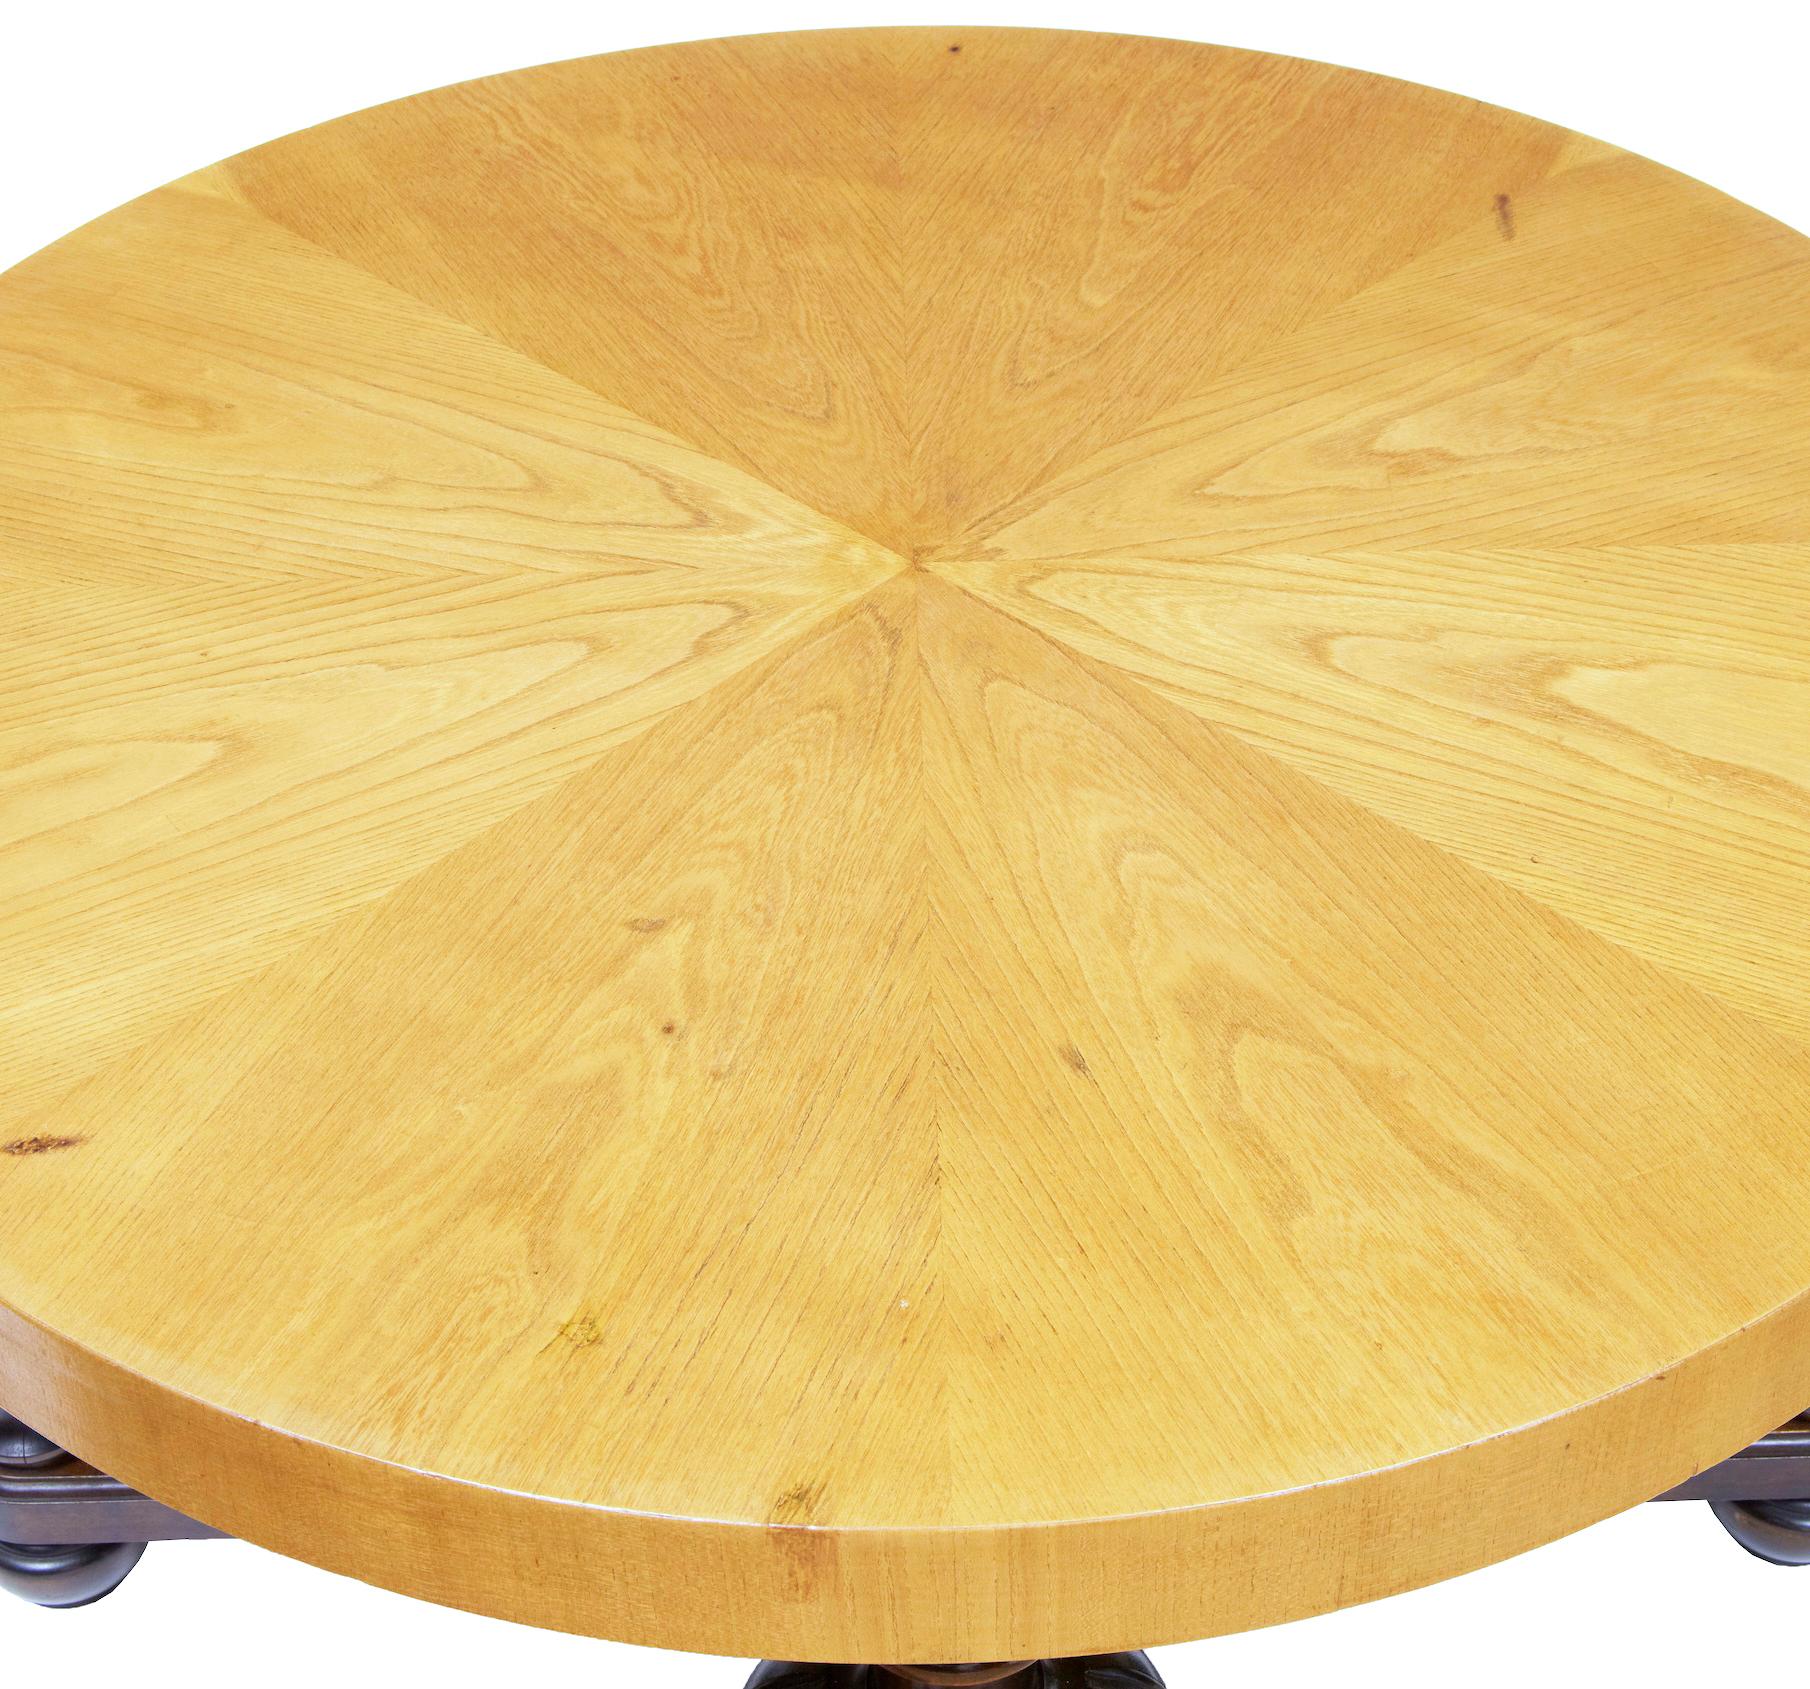 Swedish Art Deco elm and birch coffee table, circa 1930.

Segmented elm circular top surface, standing on 4 bulbous and fluted legs, united by an X-frame stretcher. Standing on turned feet.

Minor restorations to veneer.
   